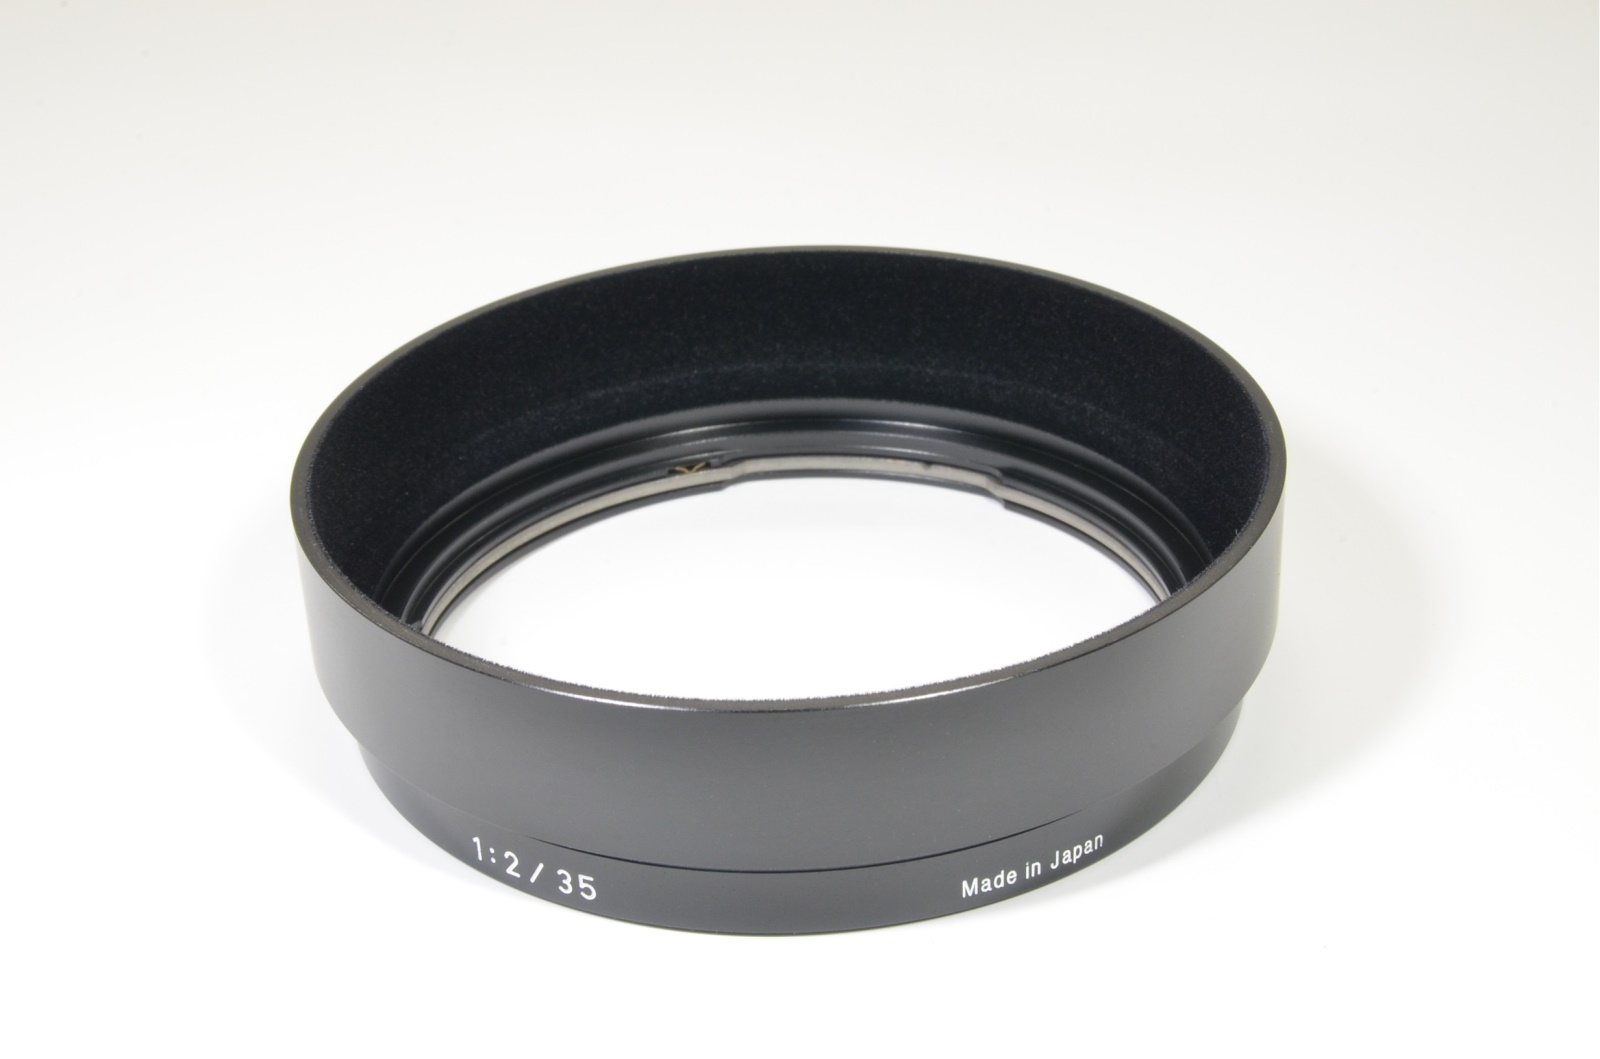 Carl Zeiss Distagon T* 35mm F2 ZF.2 Lens for Nikon F mount Never 